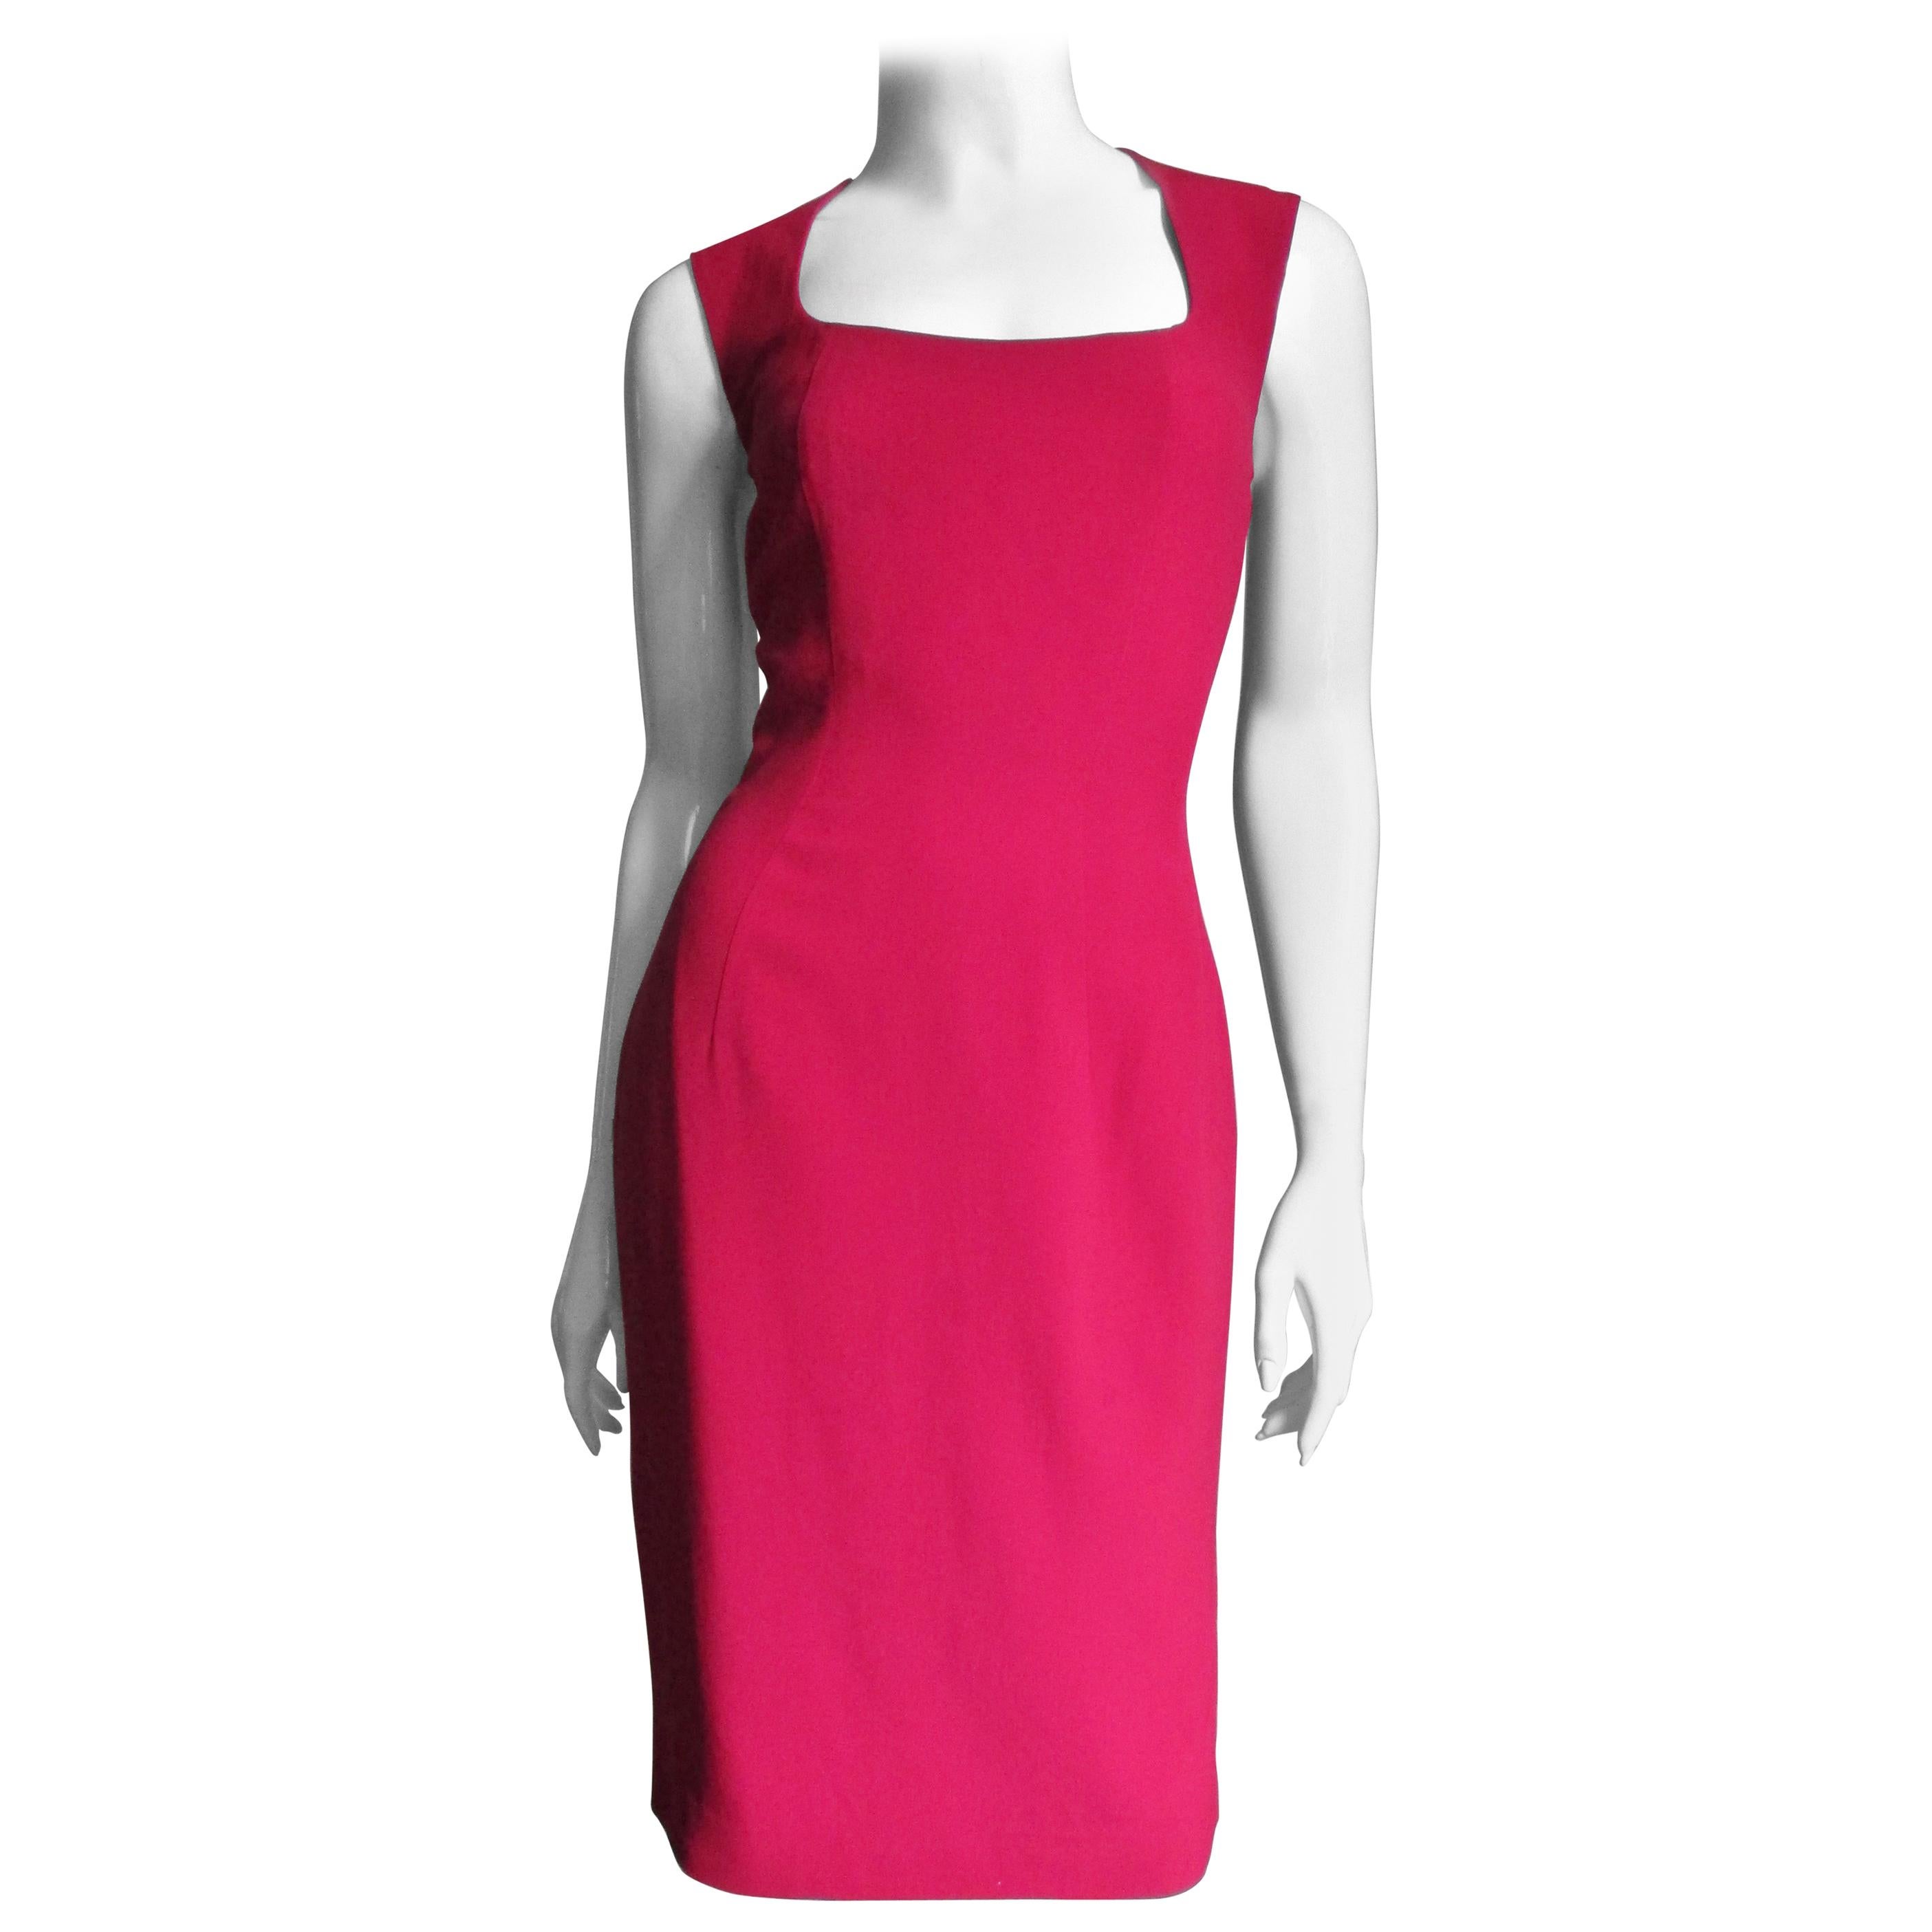 A fabulous red dress from French designer Sophie Sitbon.   It is sleeveless with a square neckline and is semi fitted with princess seaming.  The back is stunning with cut outs forming a circle at the upper back and a cross below it.  It is fully